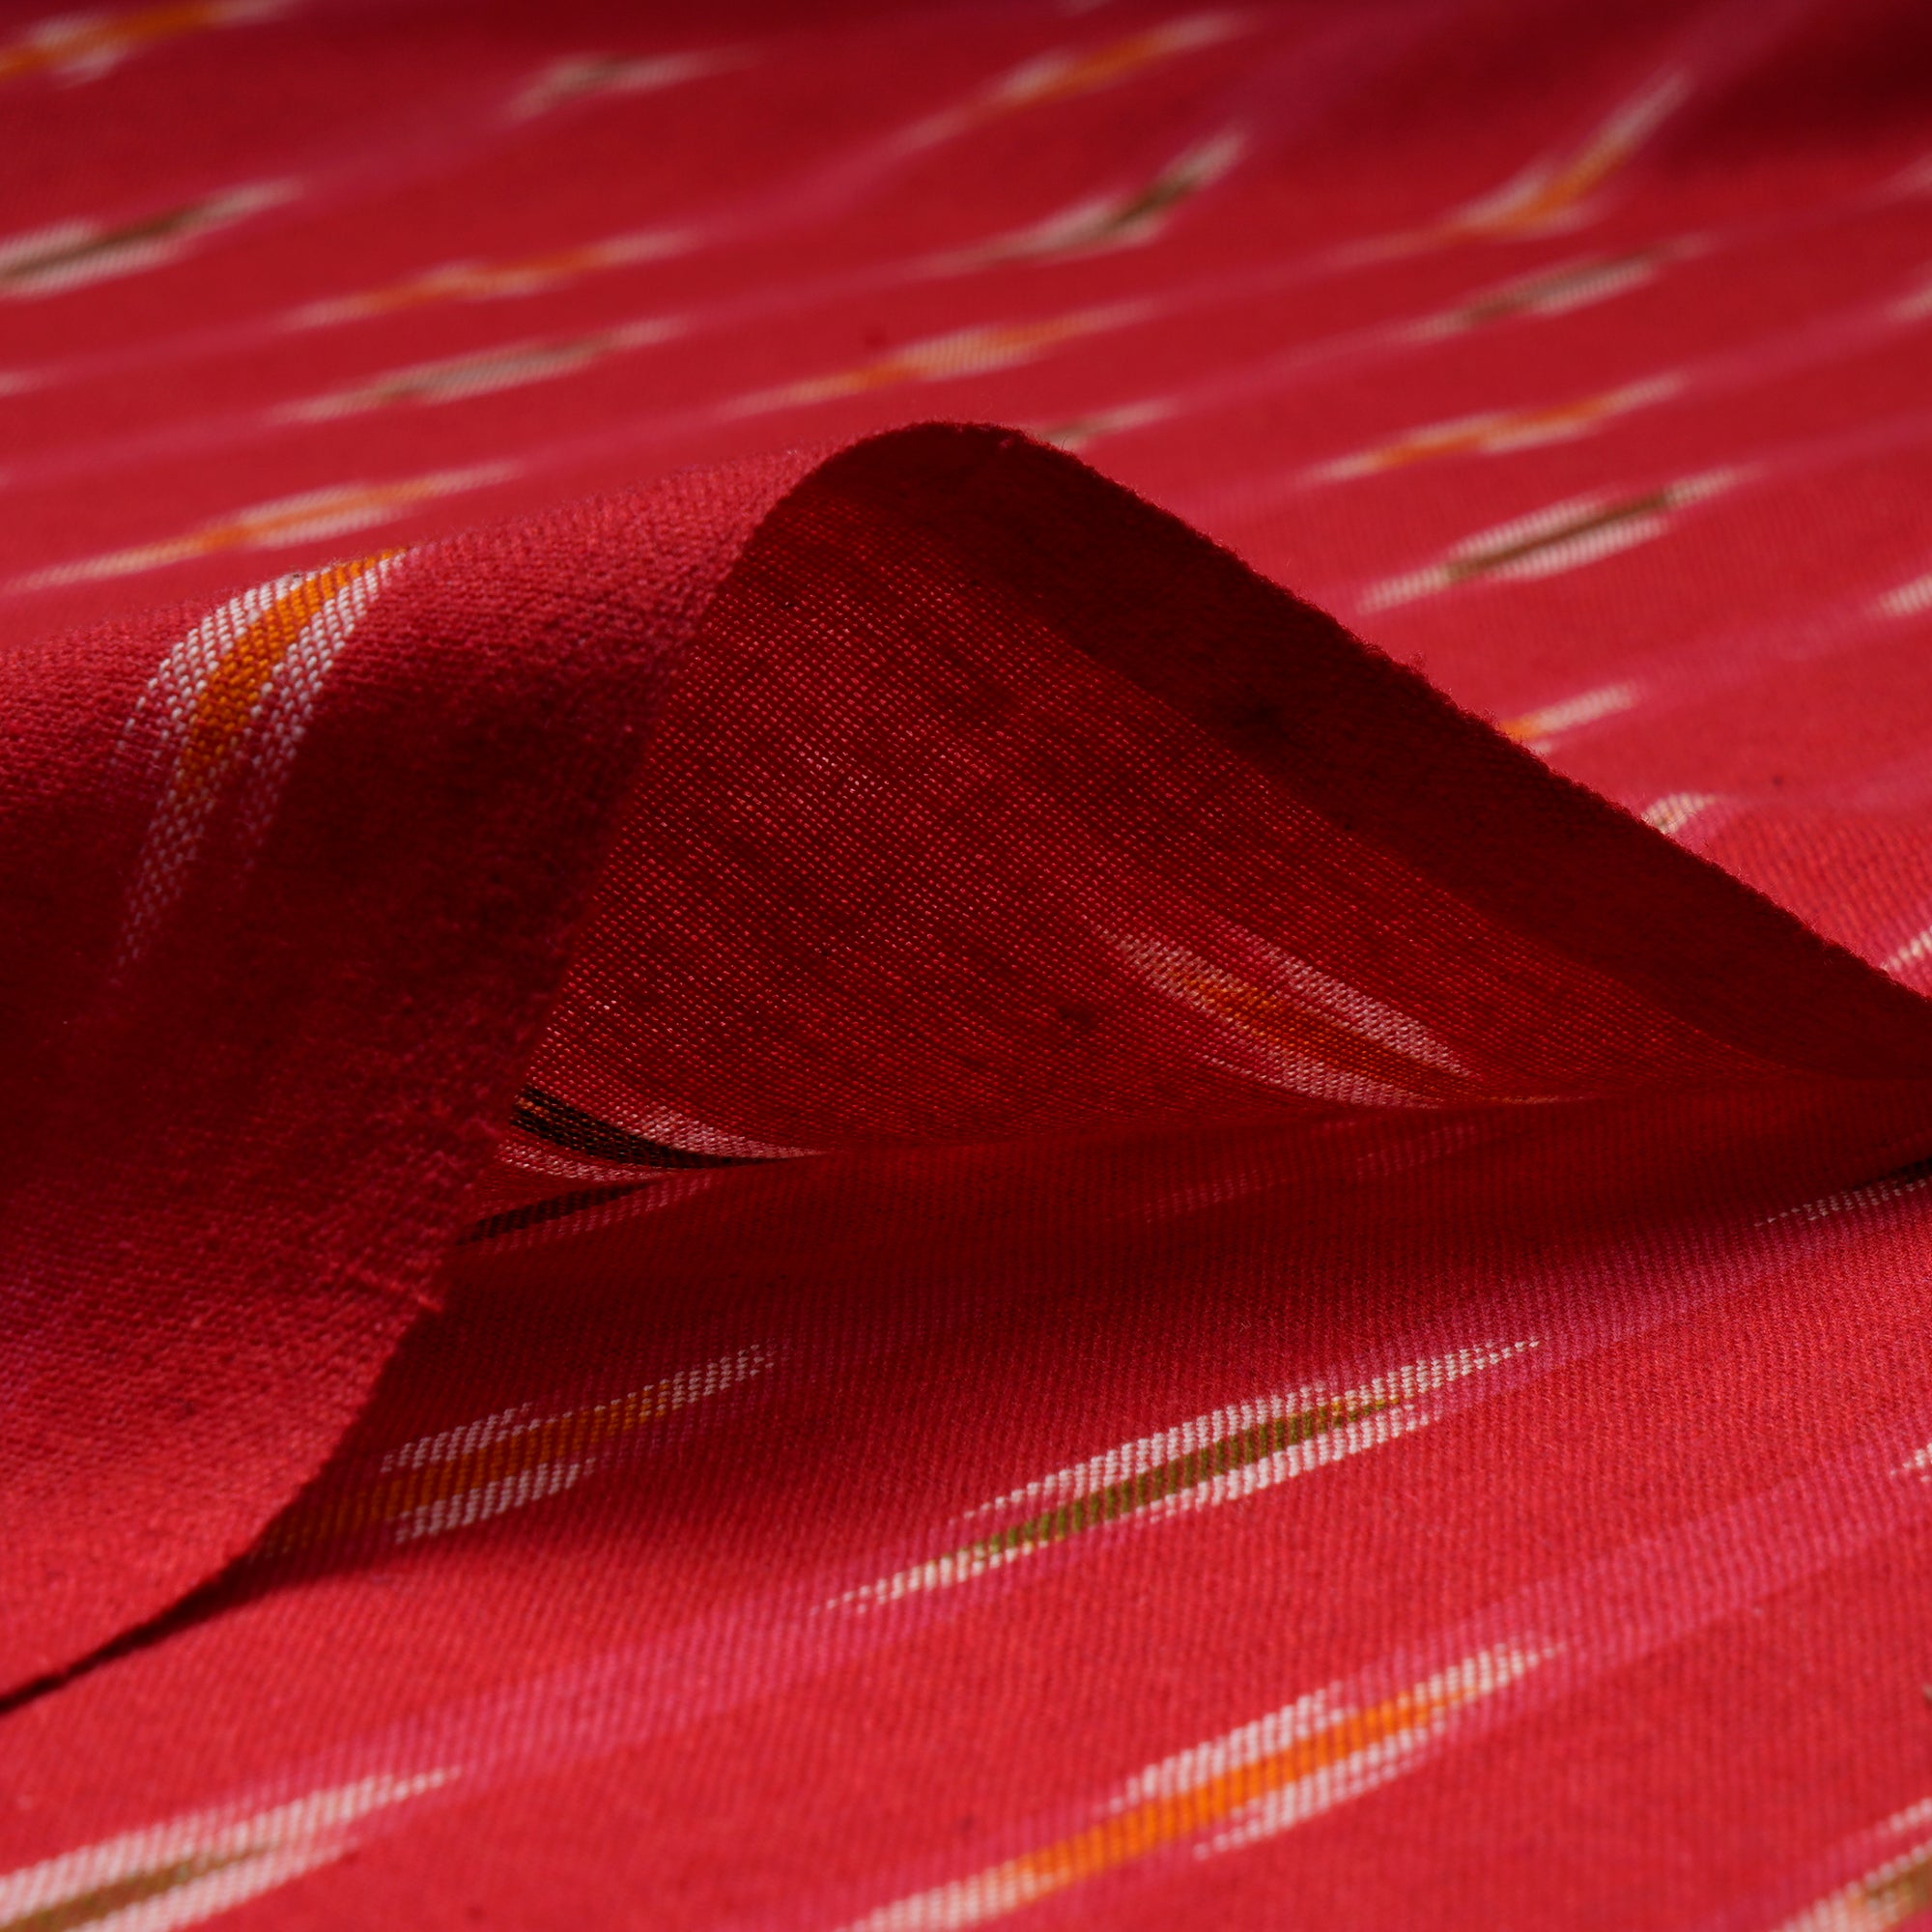 Red-White Washed Woven Ikat Cotton Fabric